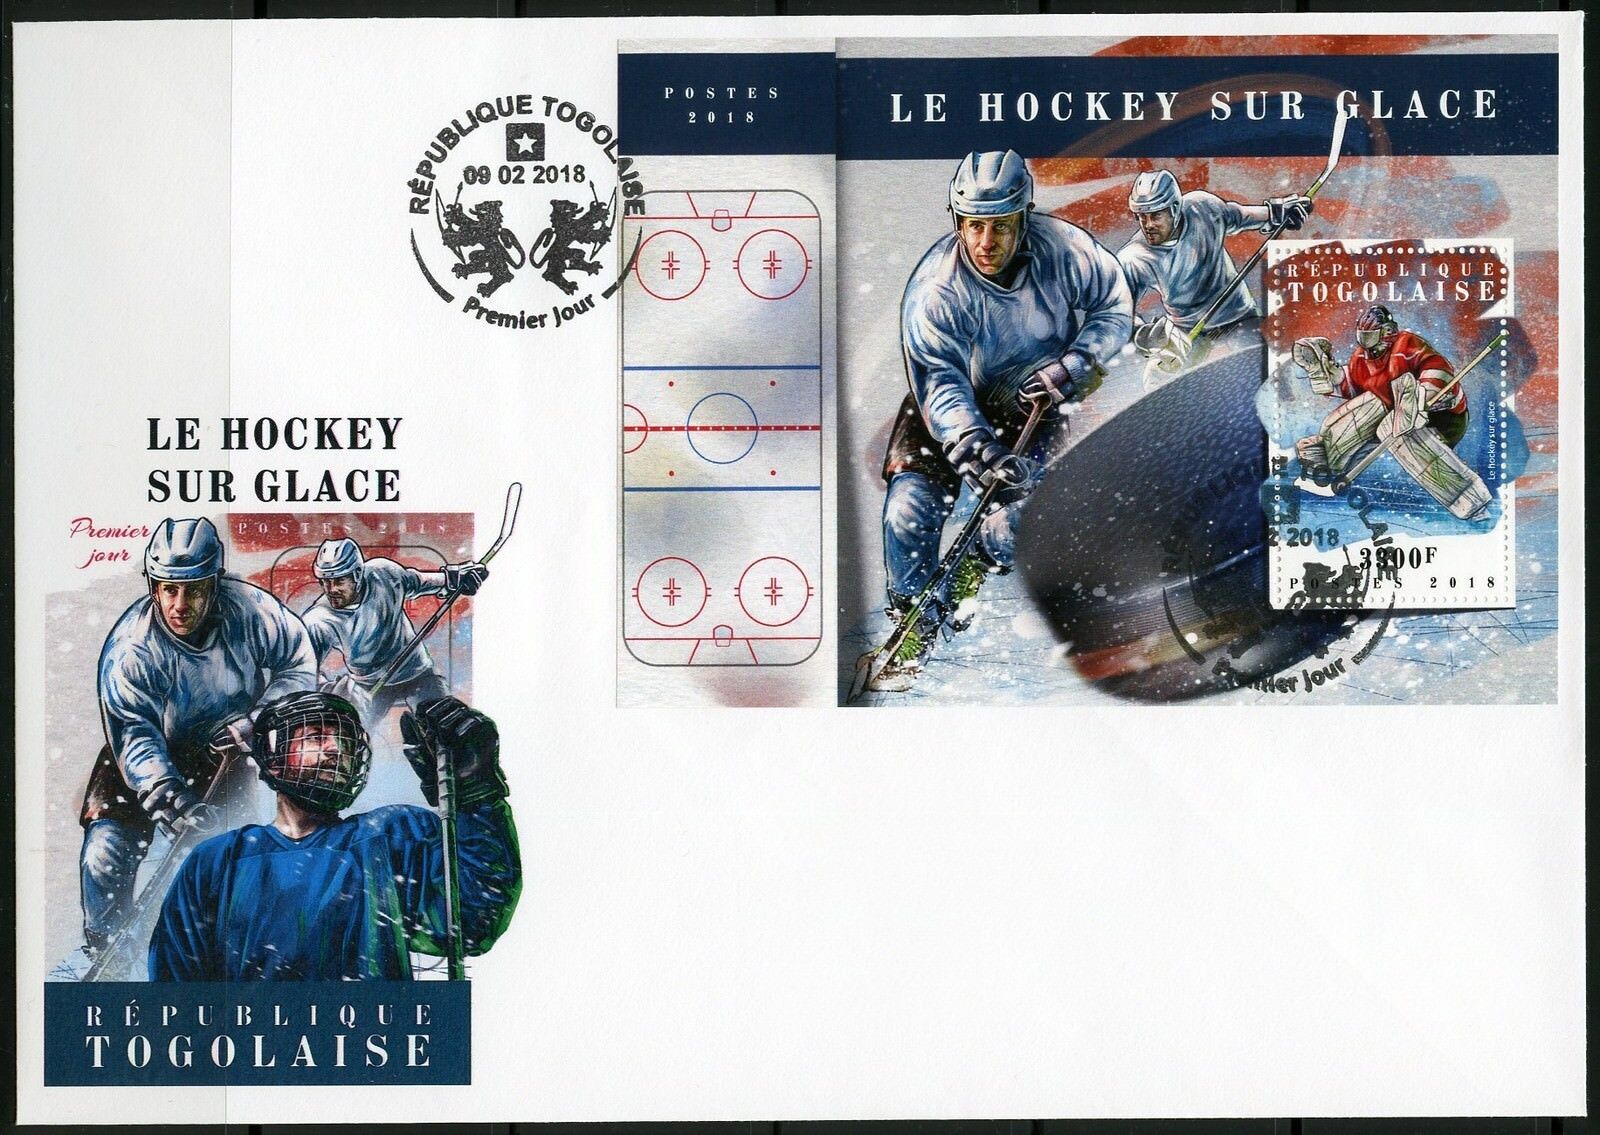 TOGO 2018 ICE HOCKEY SOUVENIR SHEET FIRST DAY COVER